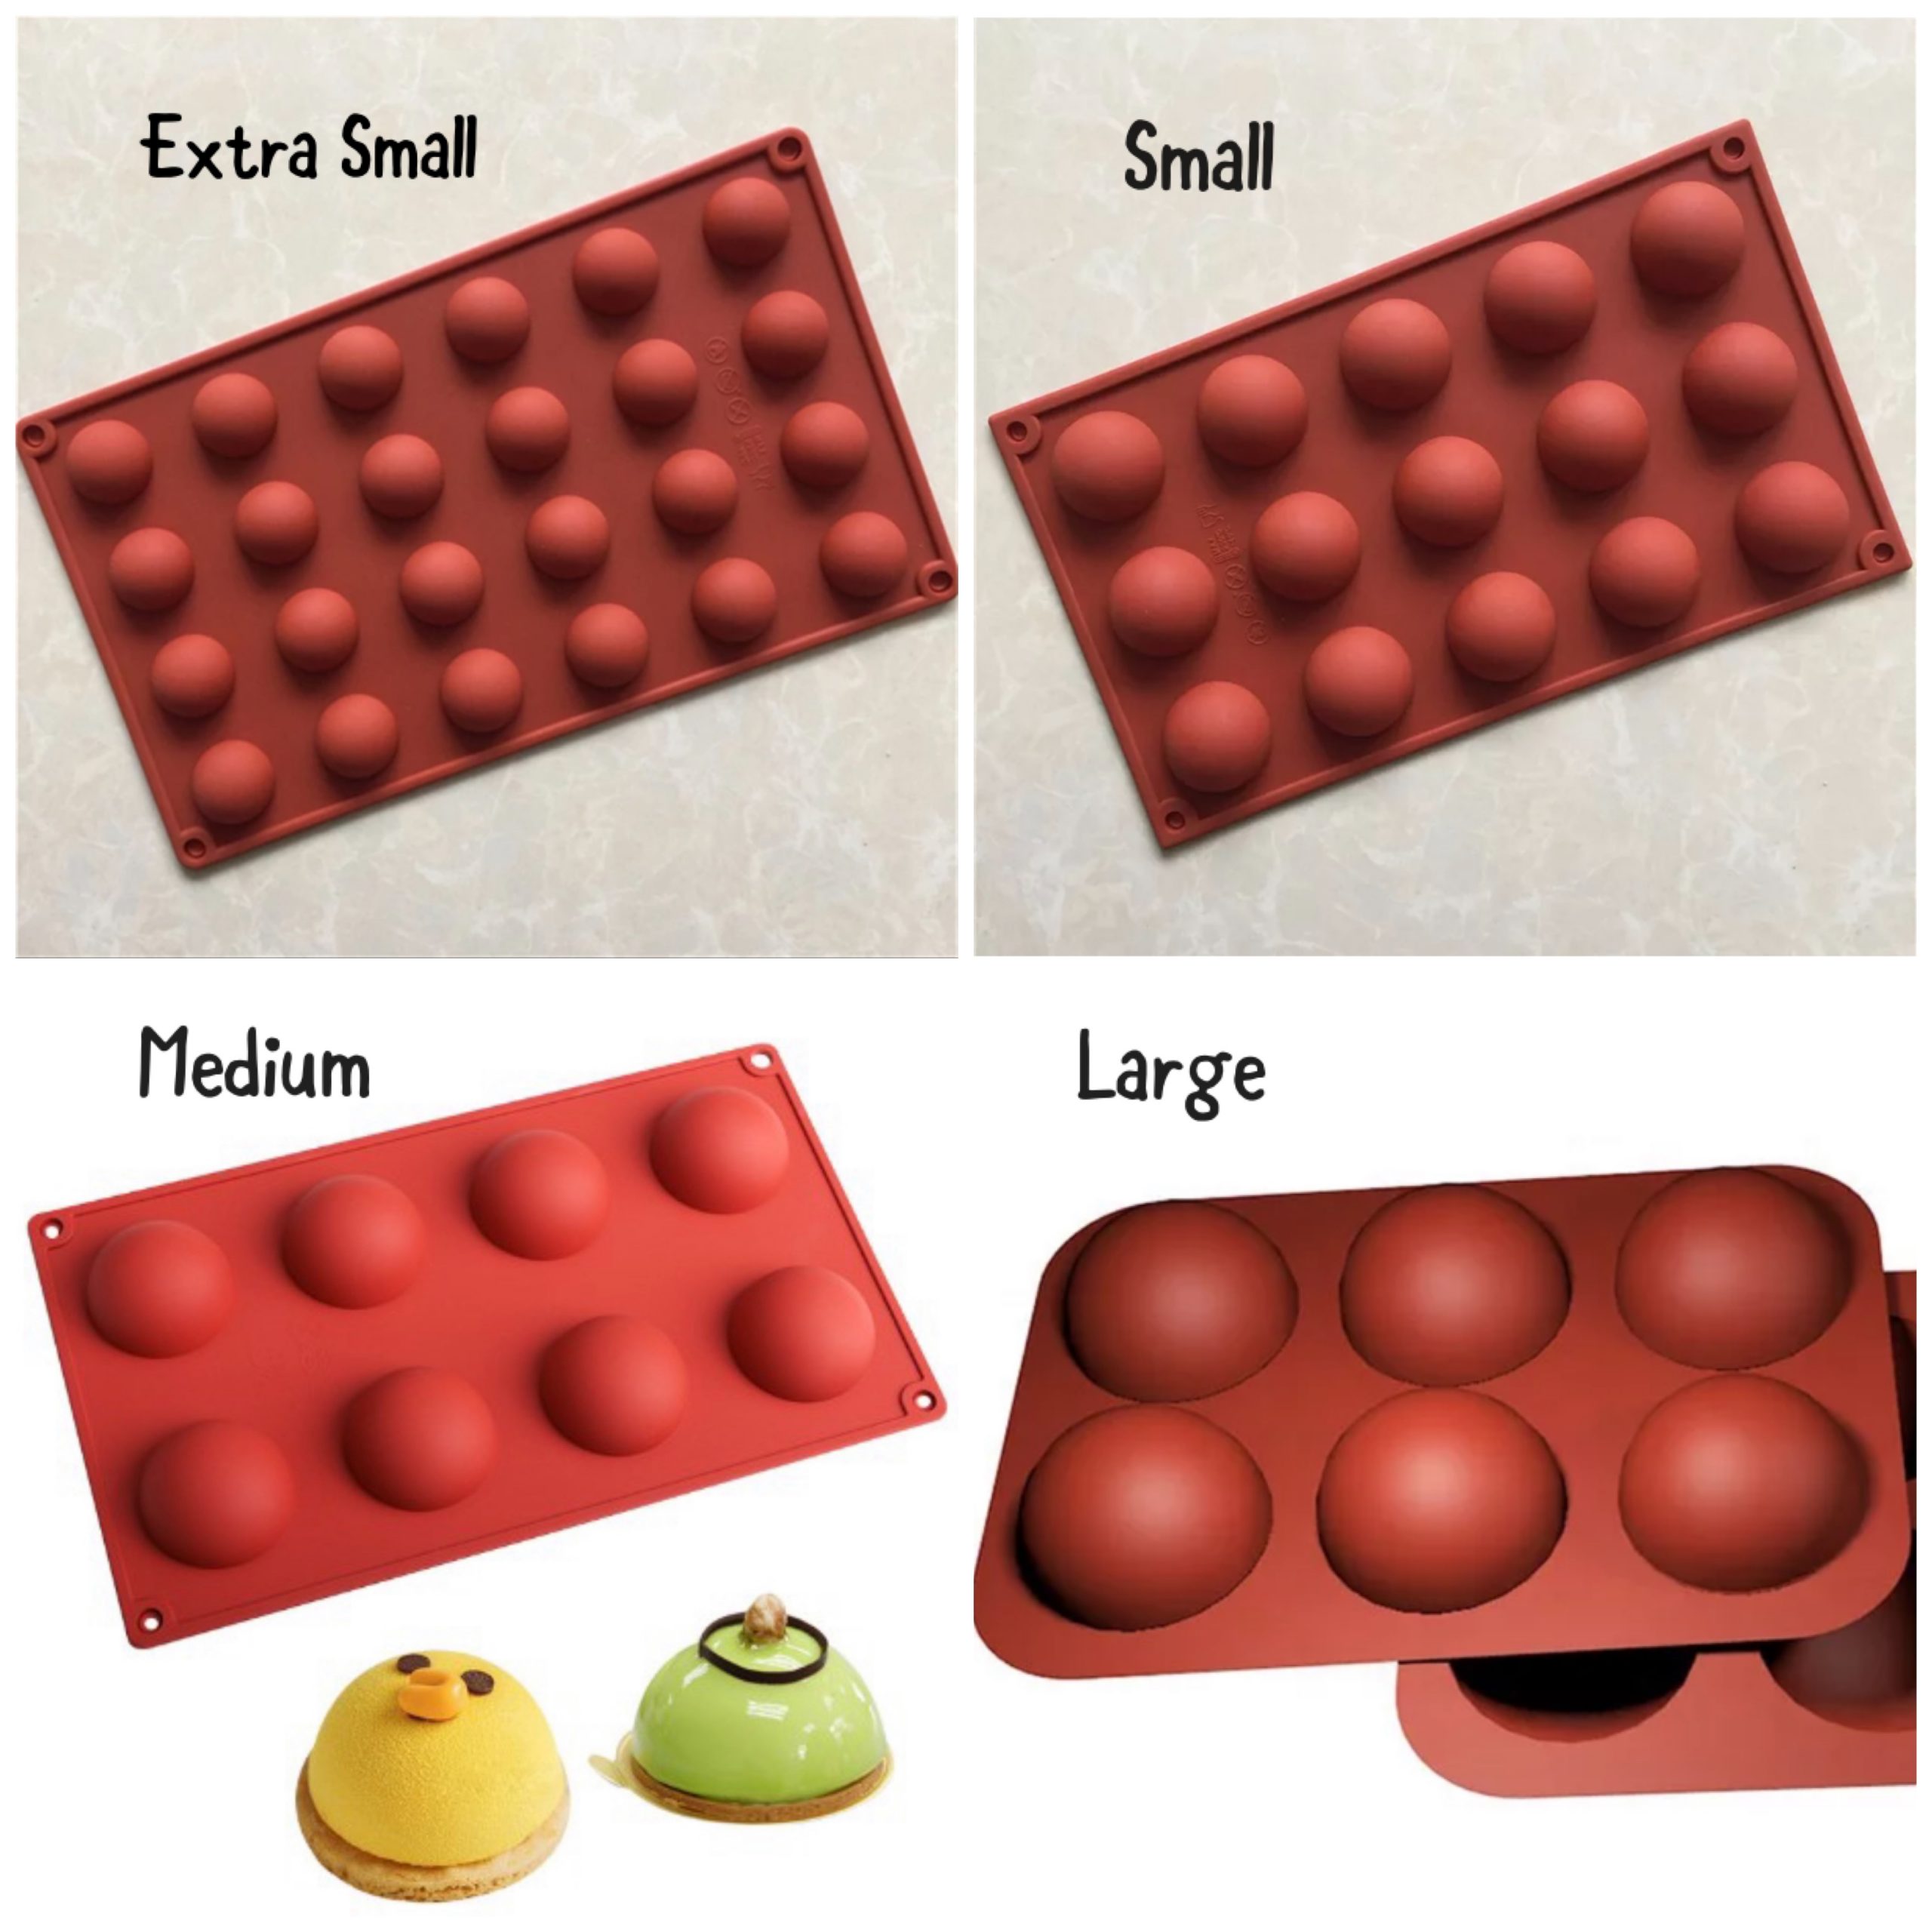 Walfos Mini 24-Cavity Semi Circular Silicone Mold, 2 Packs Half Sphere Silicone Baking Molds for Making Jelly, Chocolates and Cake